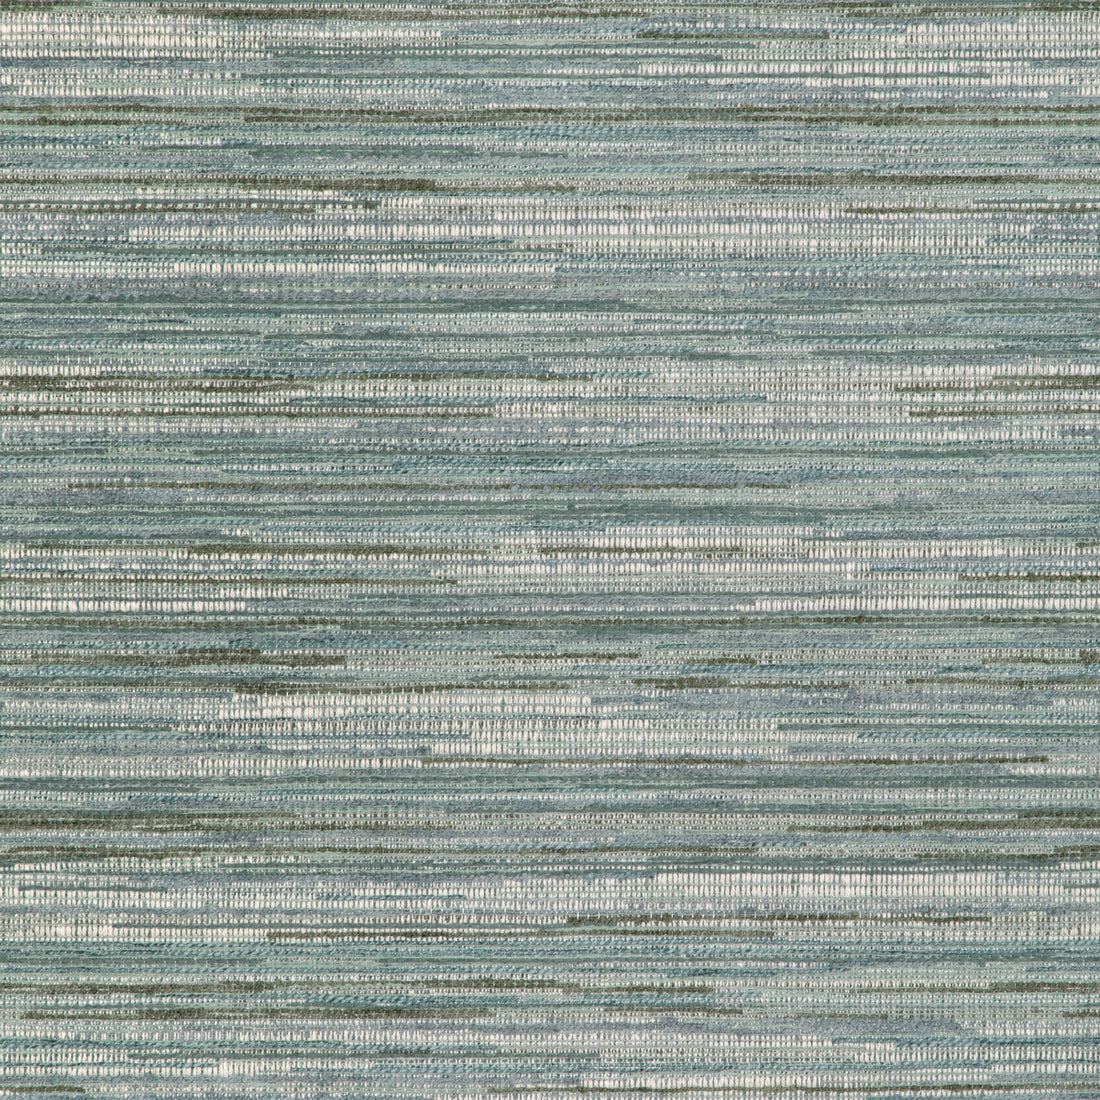 Kravet Design fabric in 37117-1535 color - pattern 37117.1535.0 - by Kravet Design in the Woven Colors collection